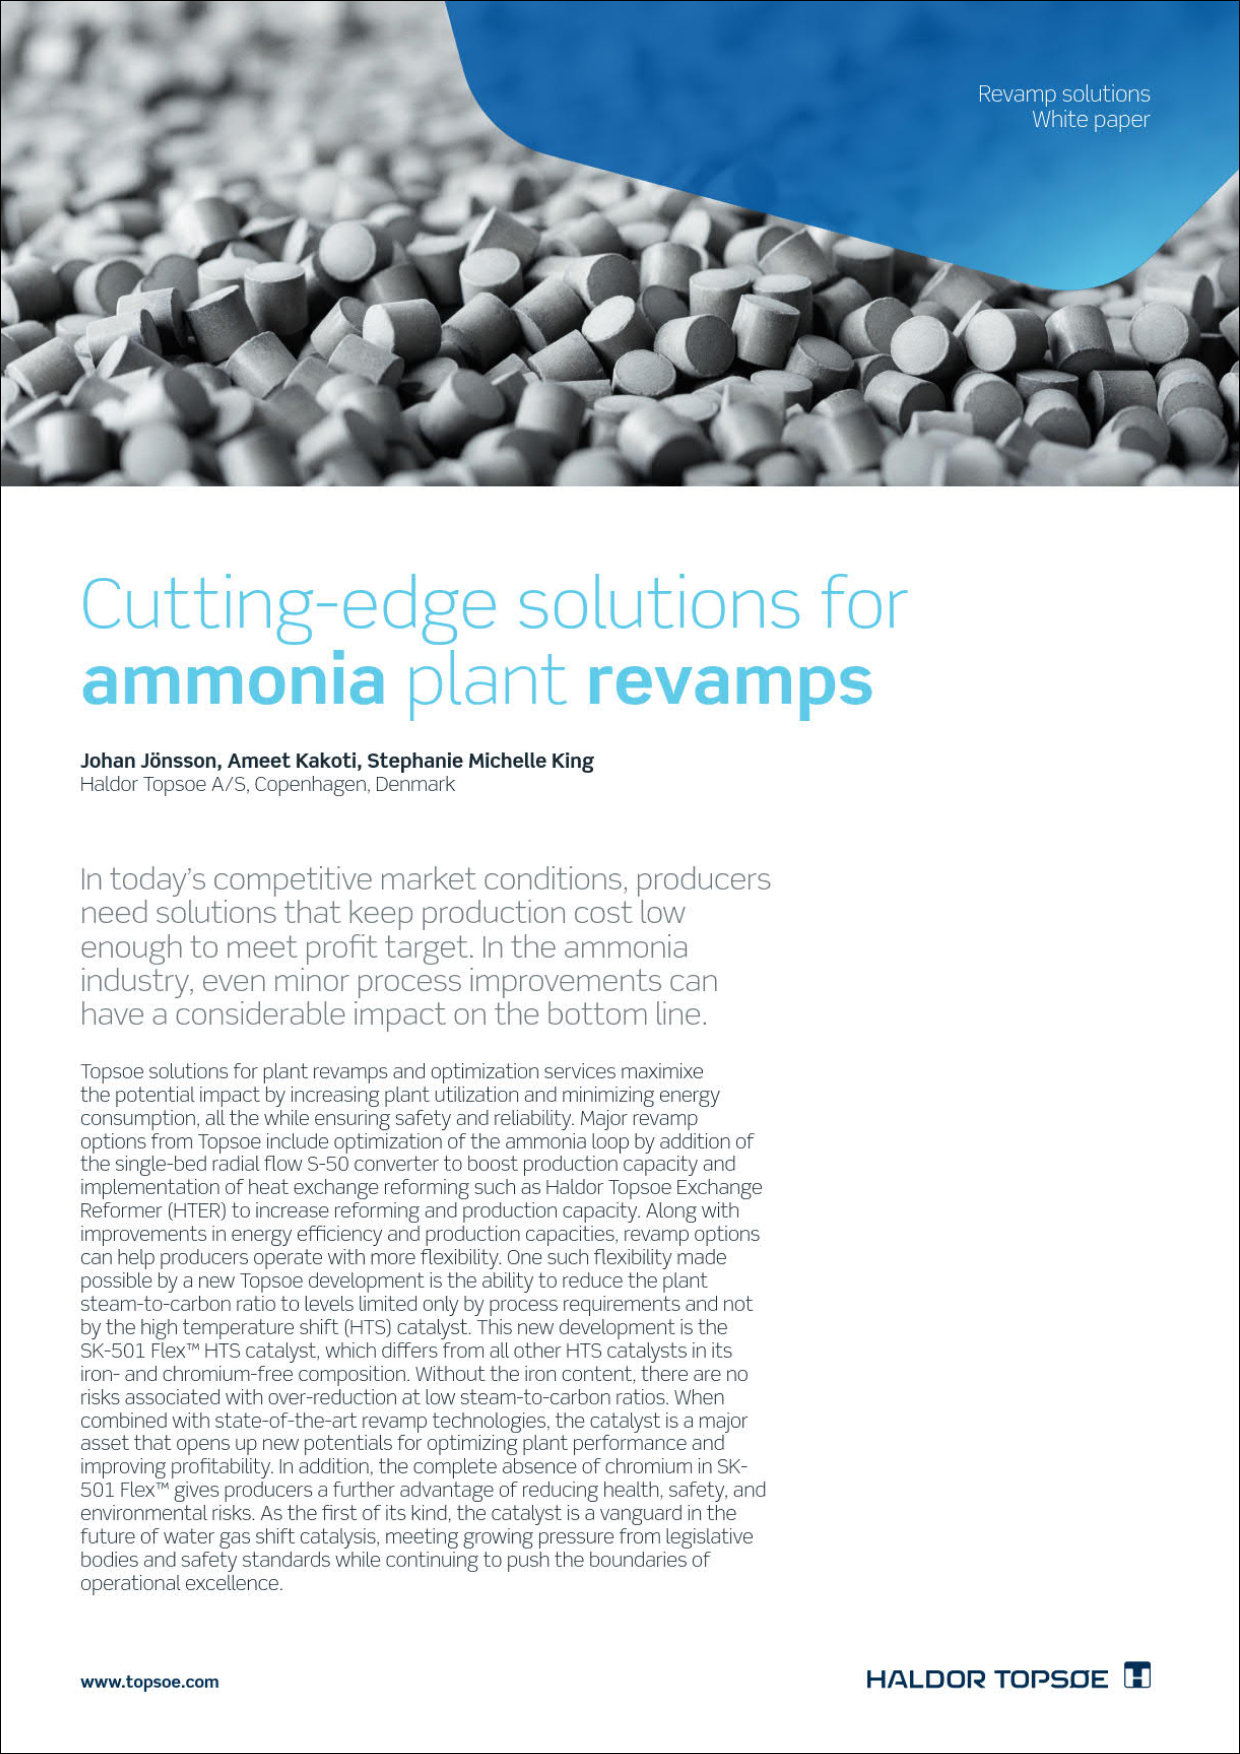  Cutting-edge solutions for ammonia plant revamps